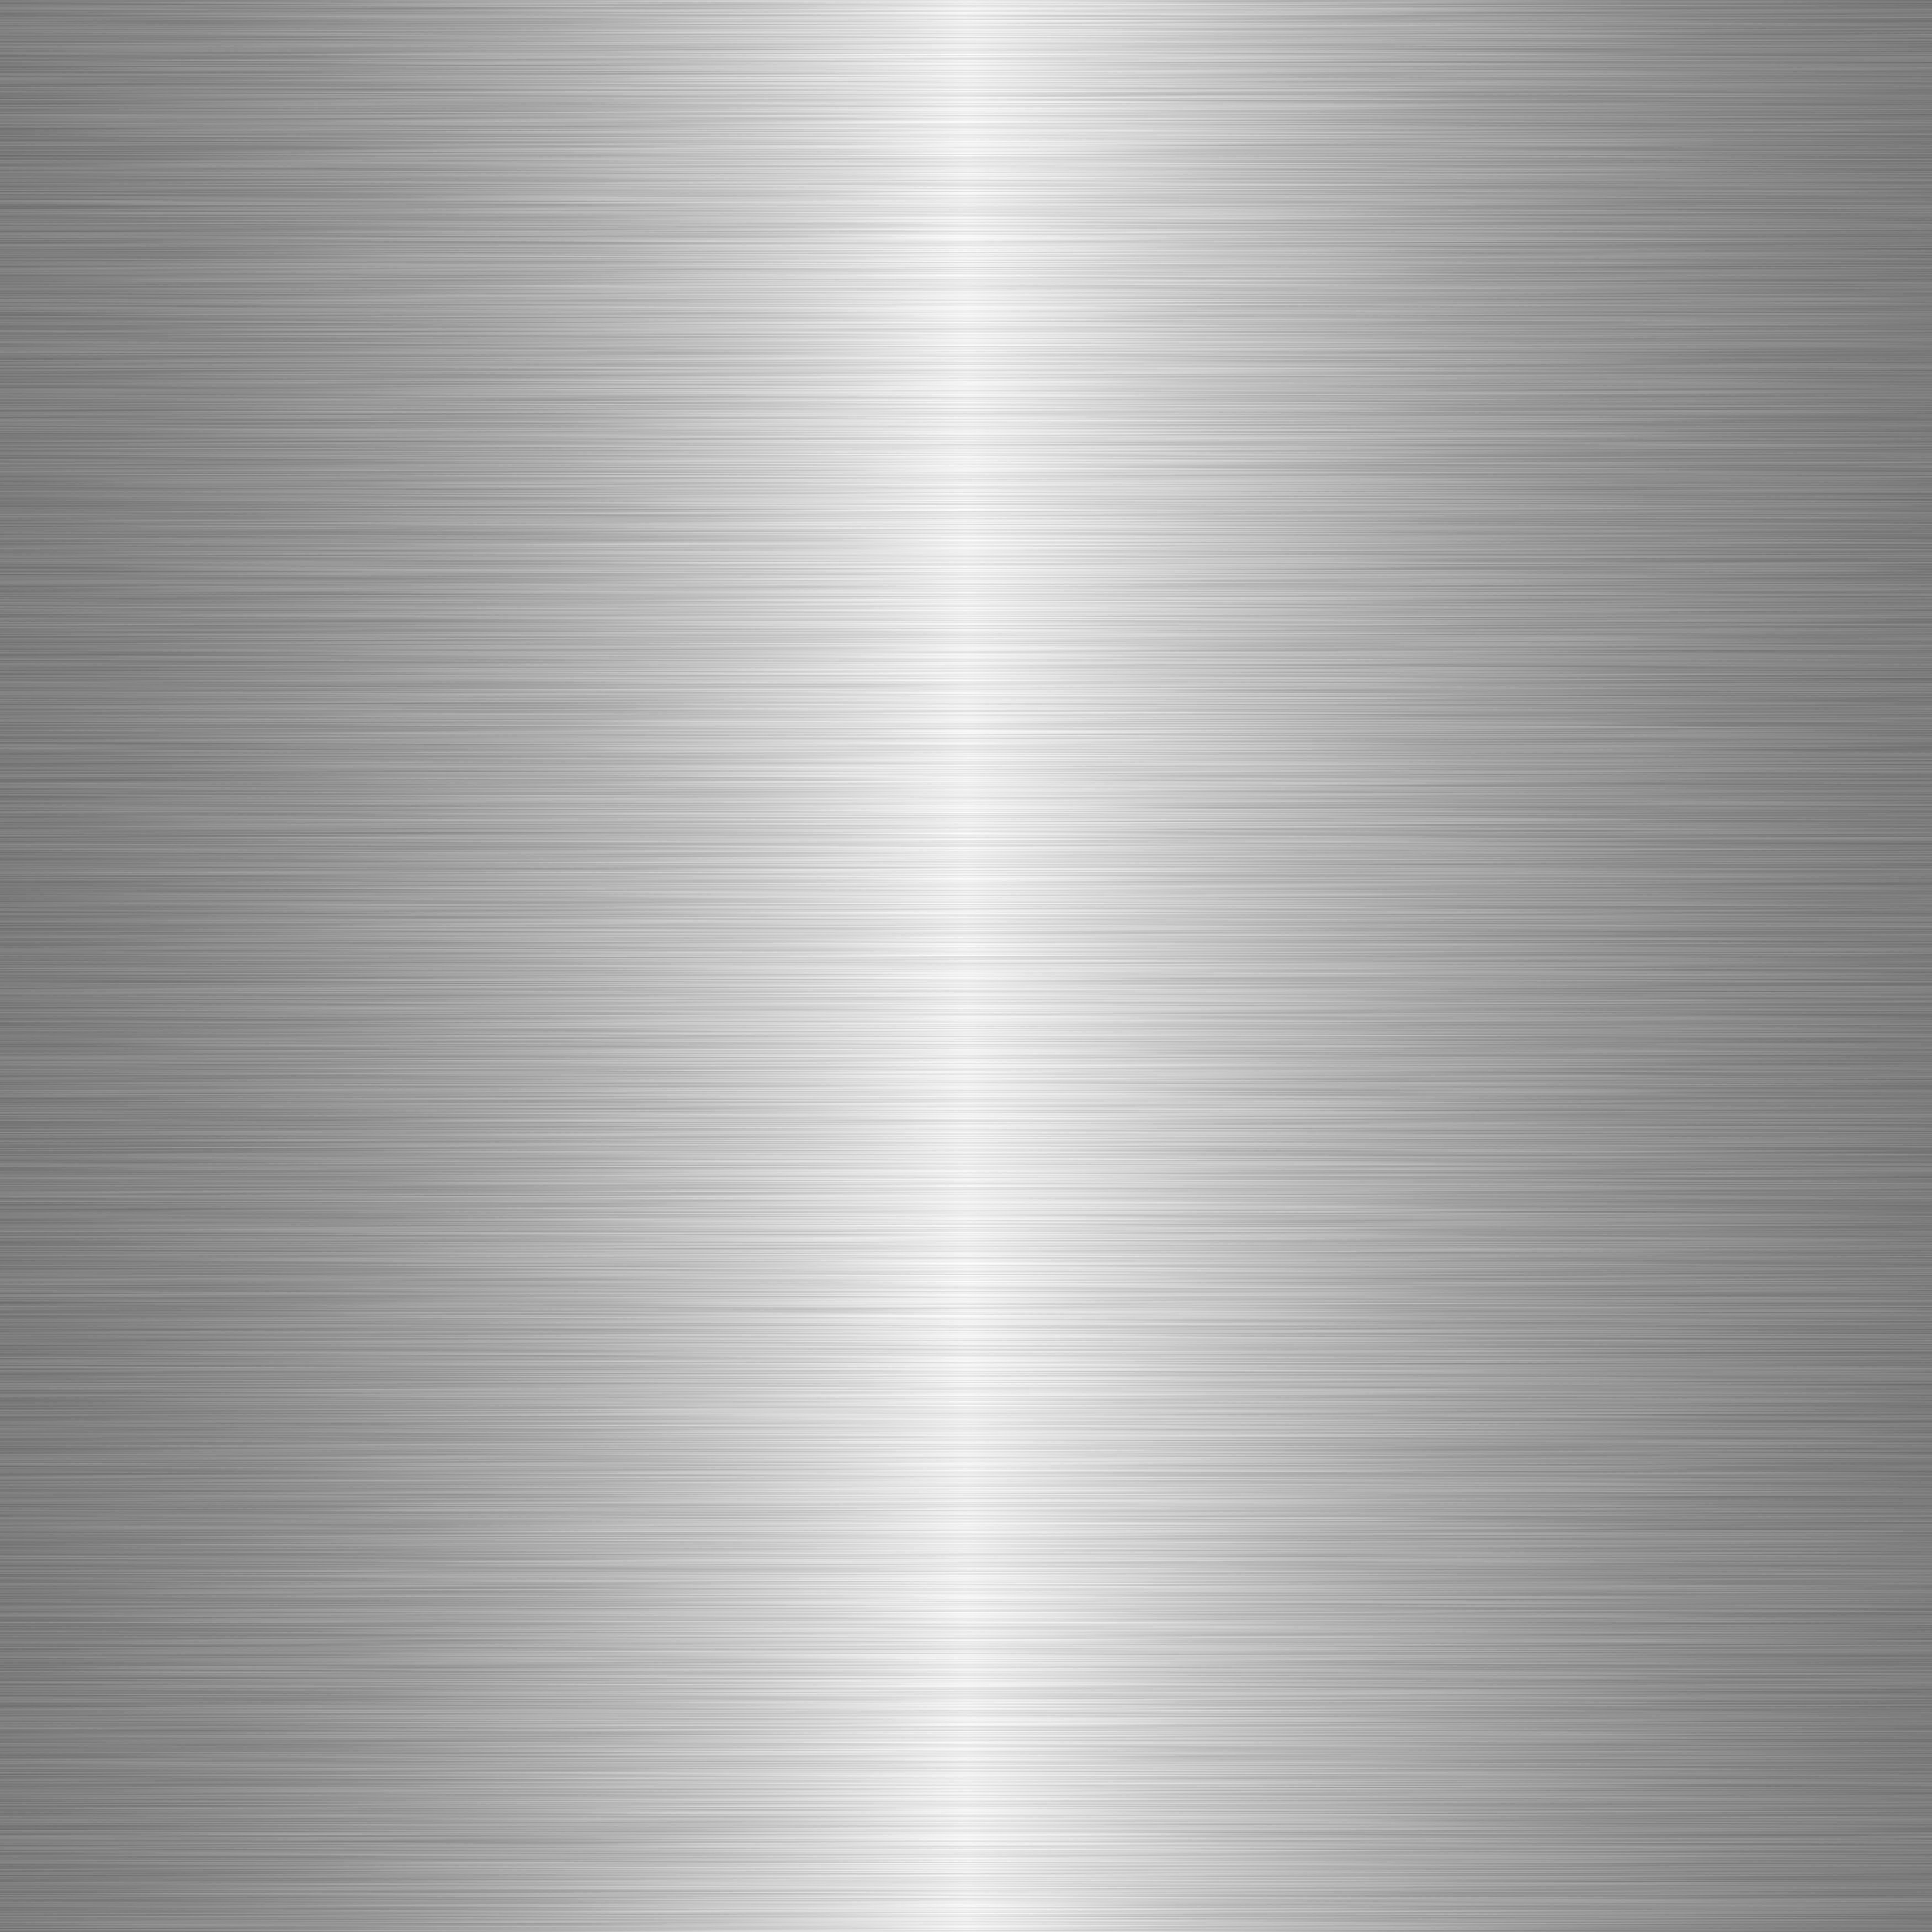 Brushed Metal Texture Background Mytextures